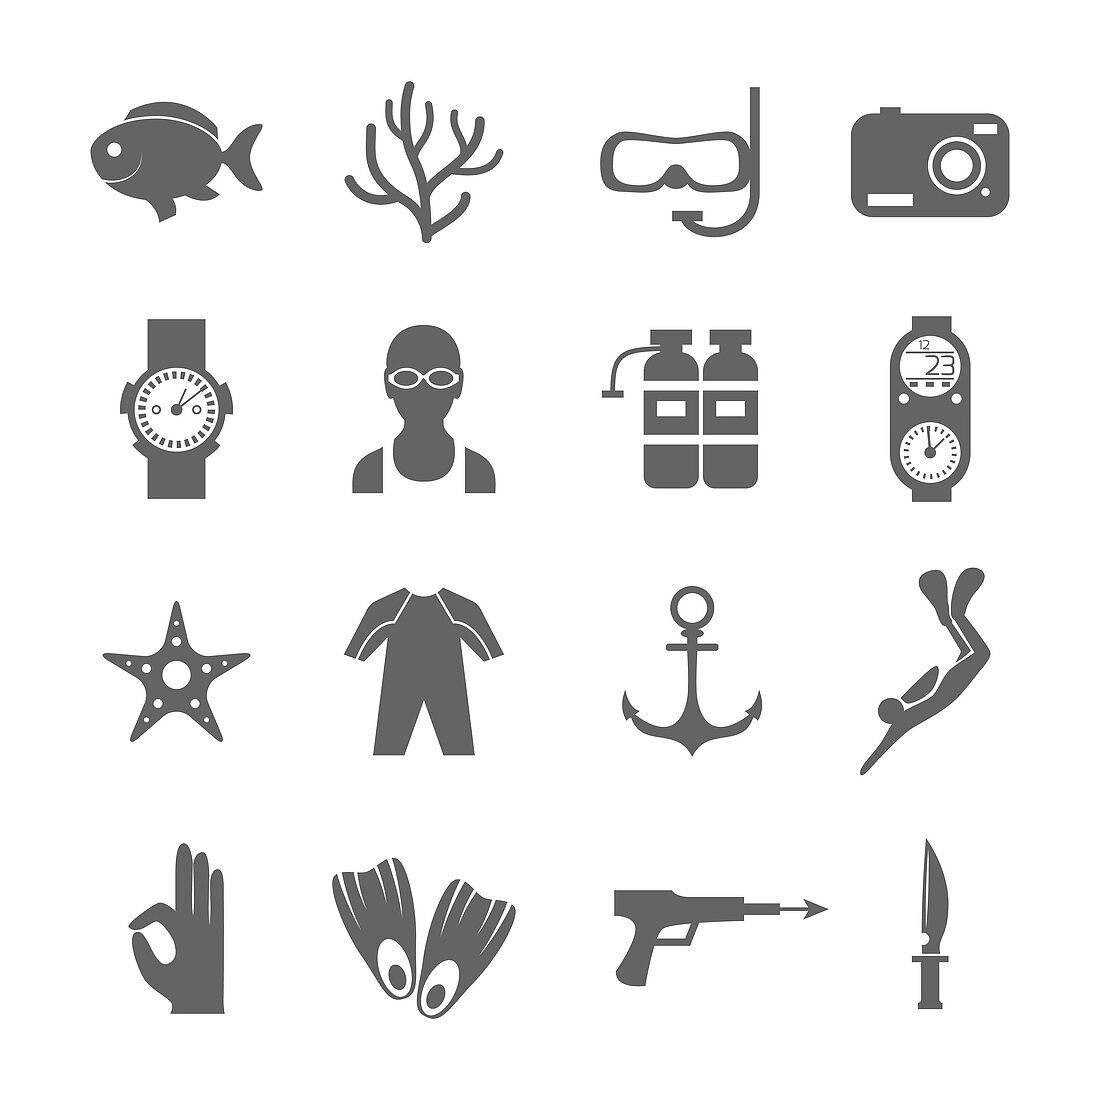 Diving icons, illustration